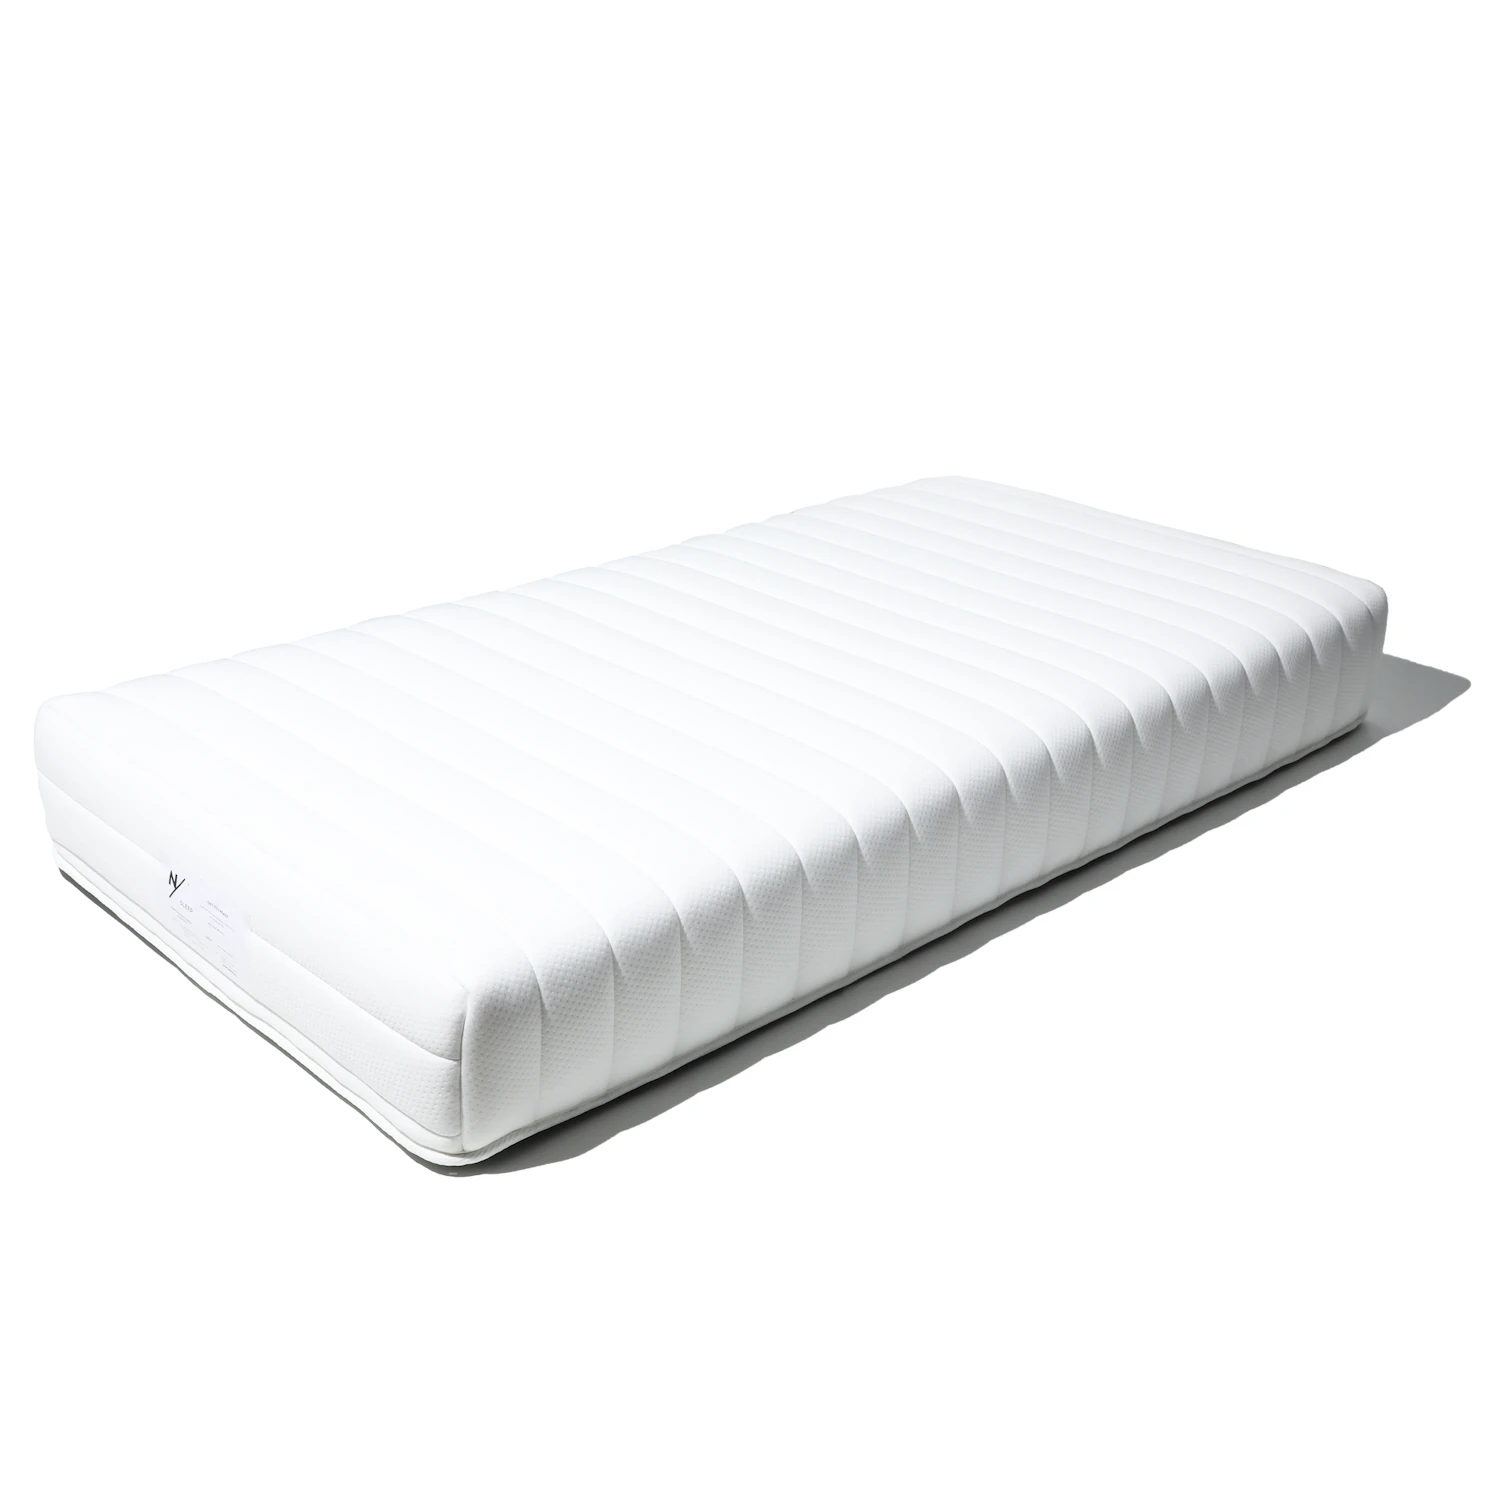 Categorized under "SLEEP," the mattress features a unique eight-layer structure and double-cushion coil structure. The eight layers include "Photon®" material that maintains a comfortable temperature, odor-eliminating, and insect-repellent materials, and high-density urethane to ensure ventilation to reduce stuffiness. Single size priced at 220,000 yen (tax included)